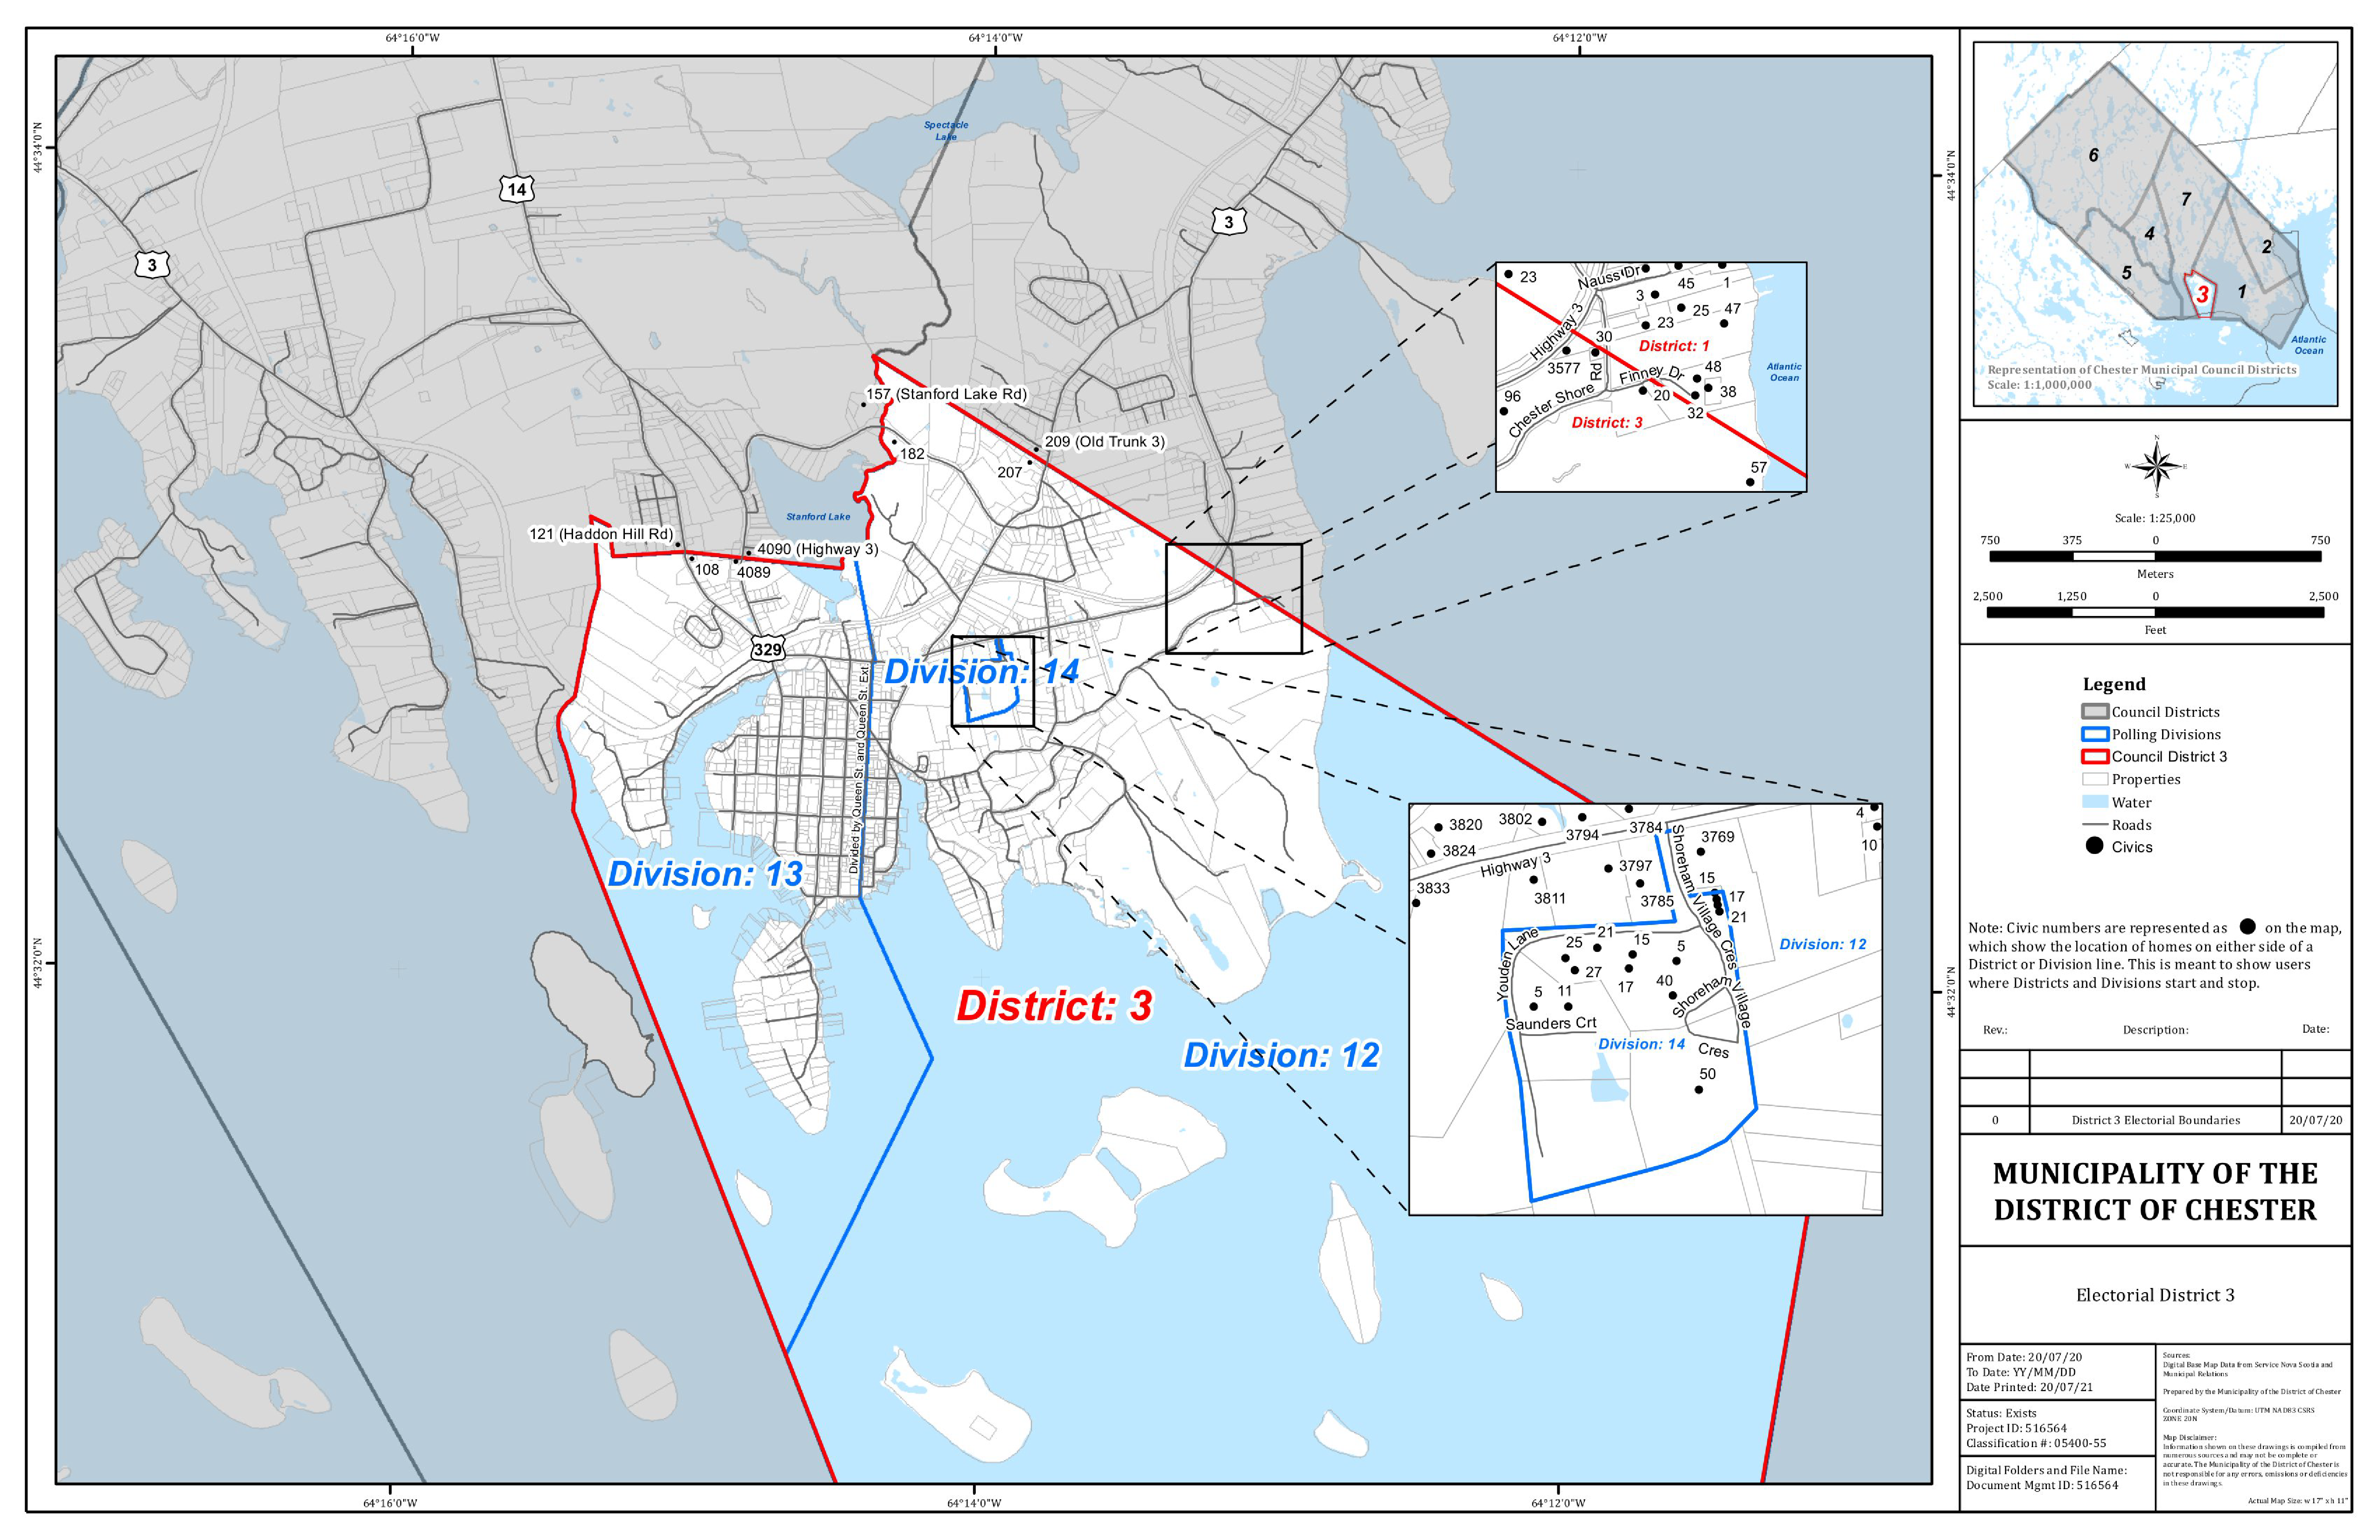 Graphic showing map of Electorial District 3 of the Municipality of the District of Chester